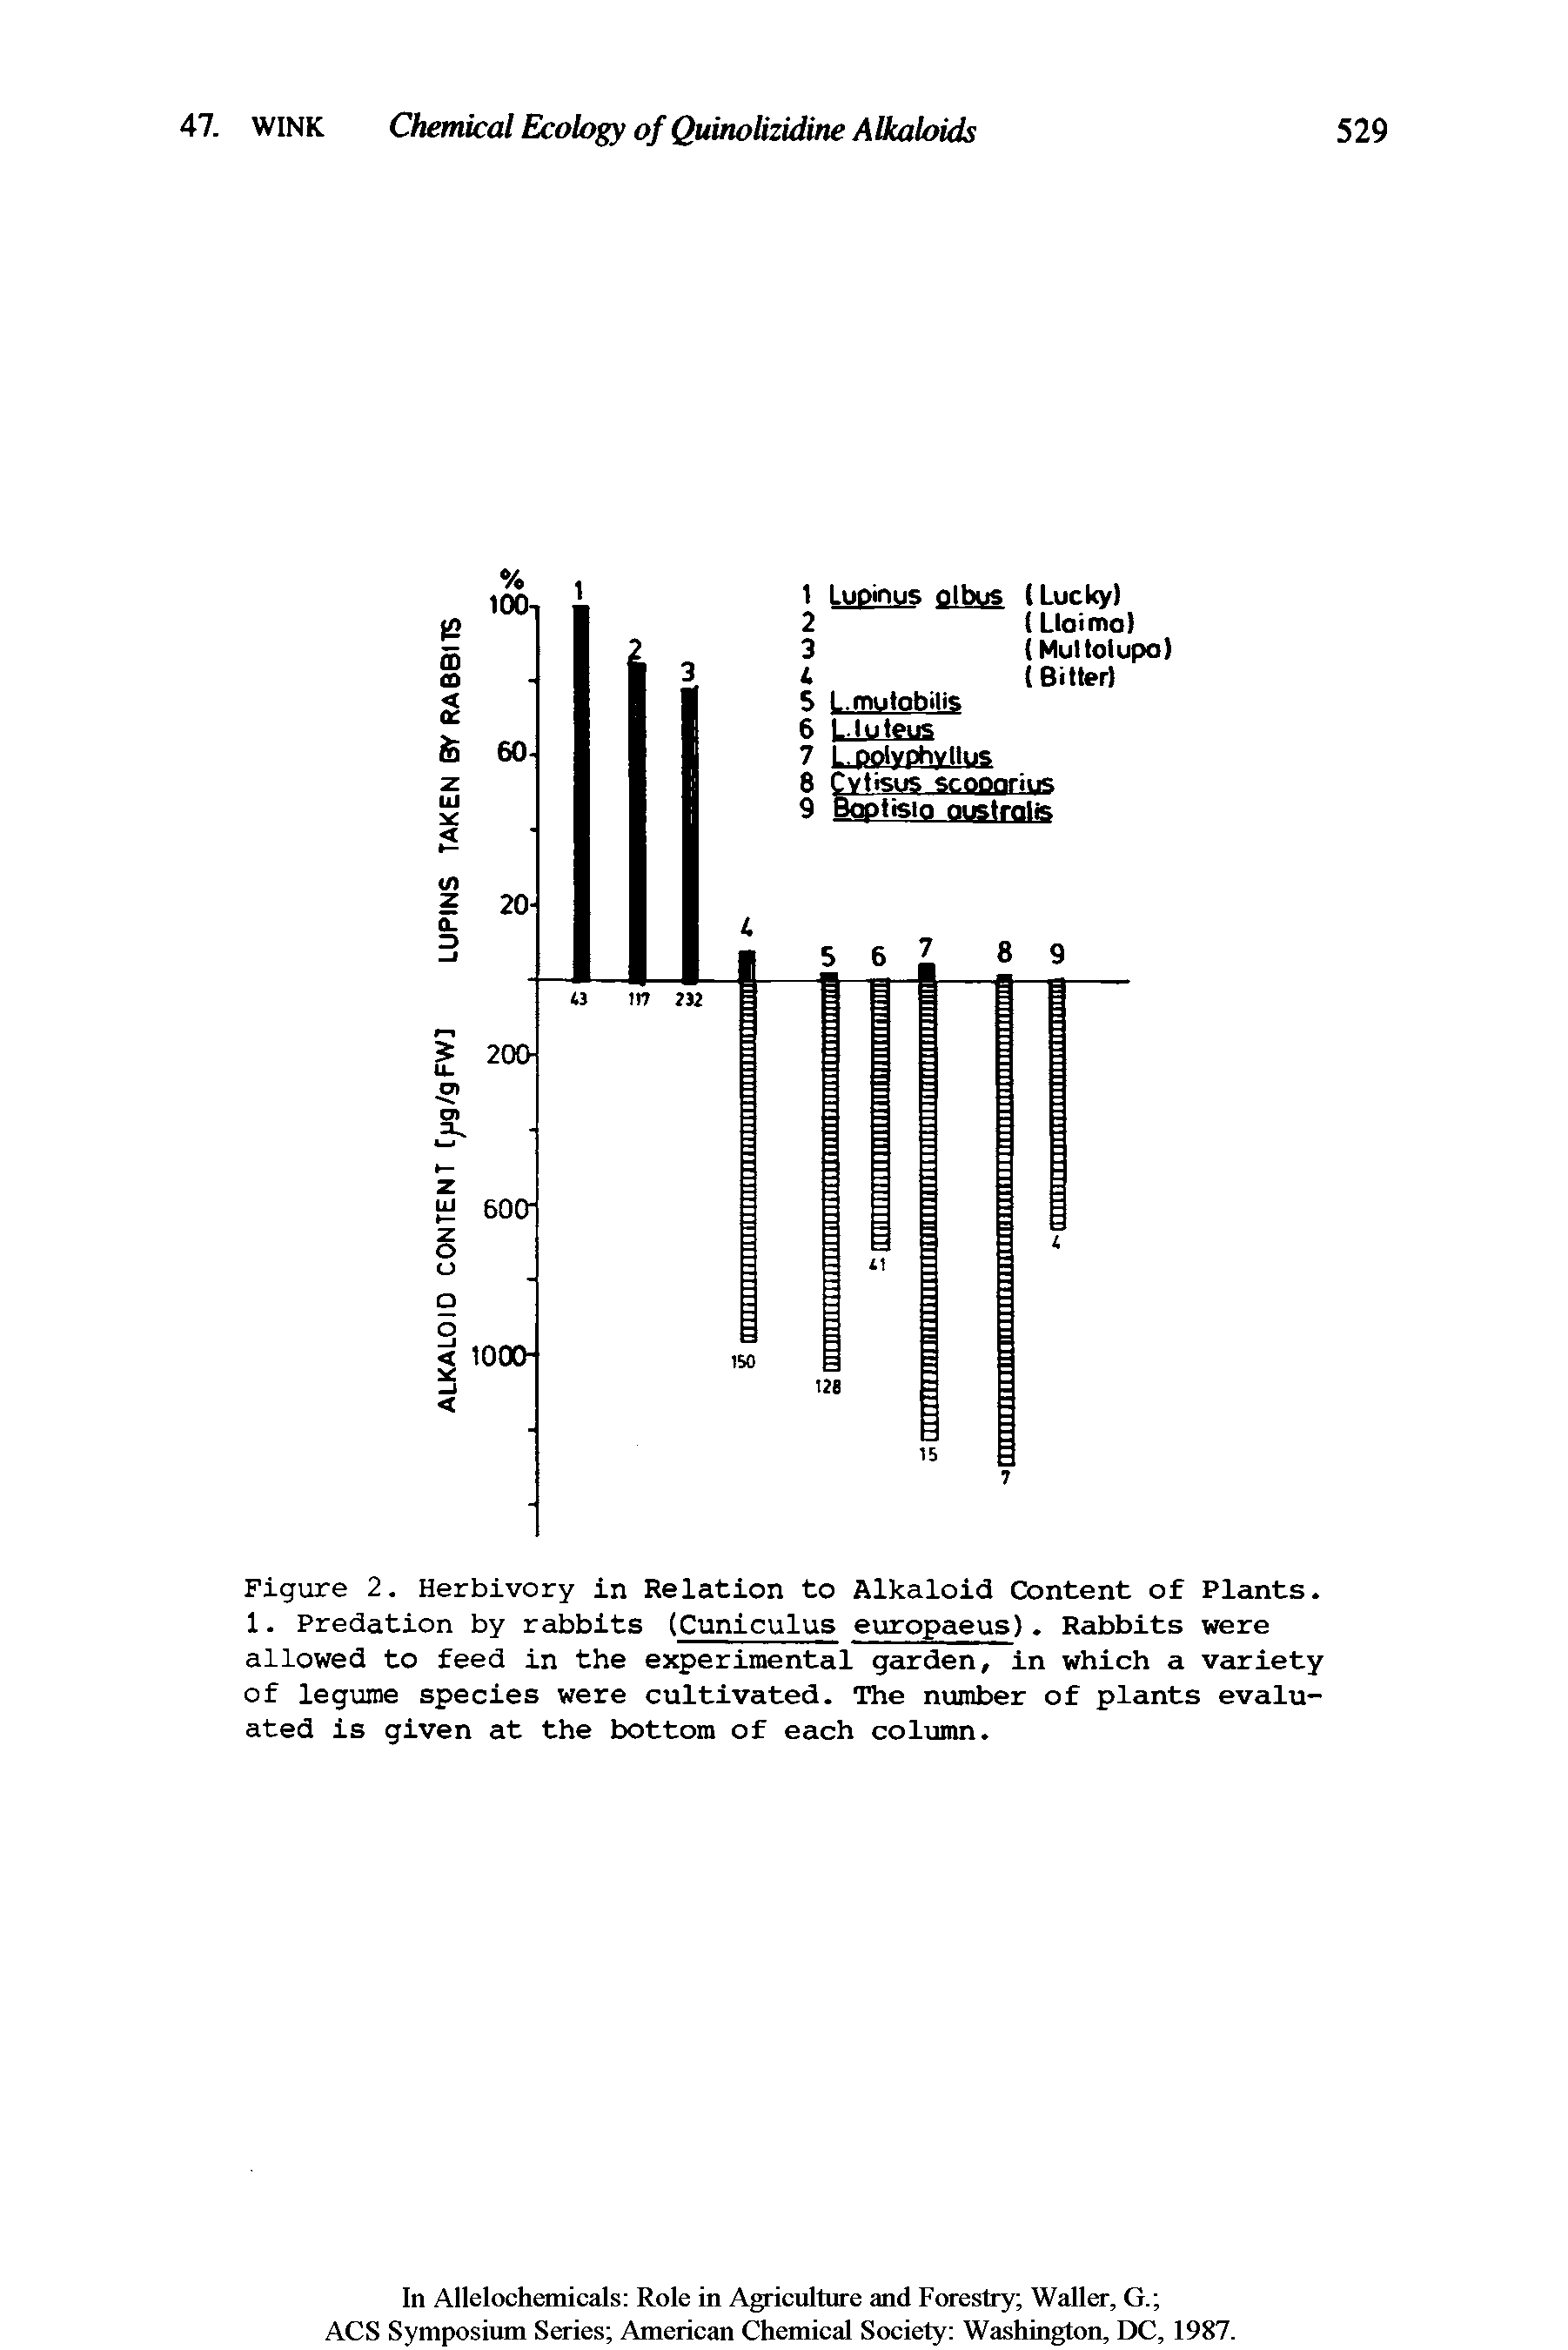 Figure 2. Herbivory in Relation to Alkaloid Content of Plants. 1. Predation by rabbits (Cuniculus europaeus). Rabbits were allowed to feed in the experimental garden, in which a variety of legume species were cultivated. The number of plants evaluated is given at the bottom of each column.